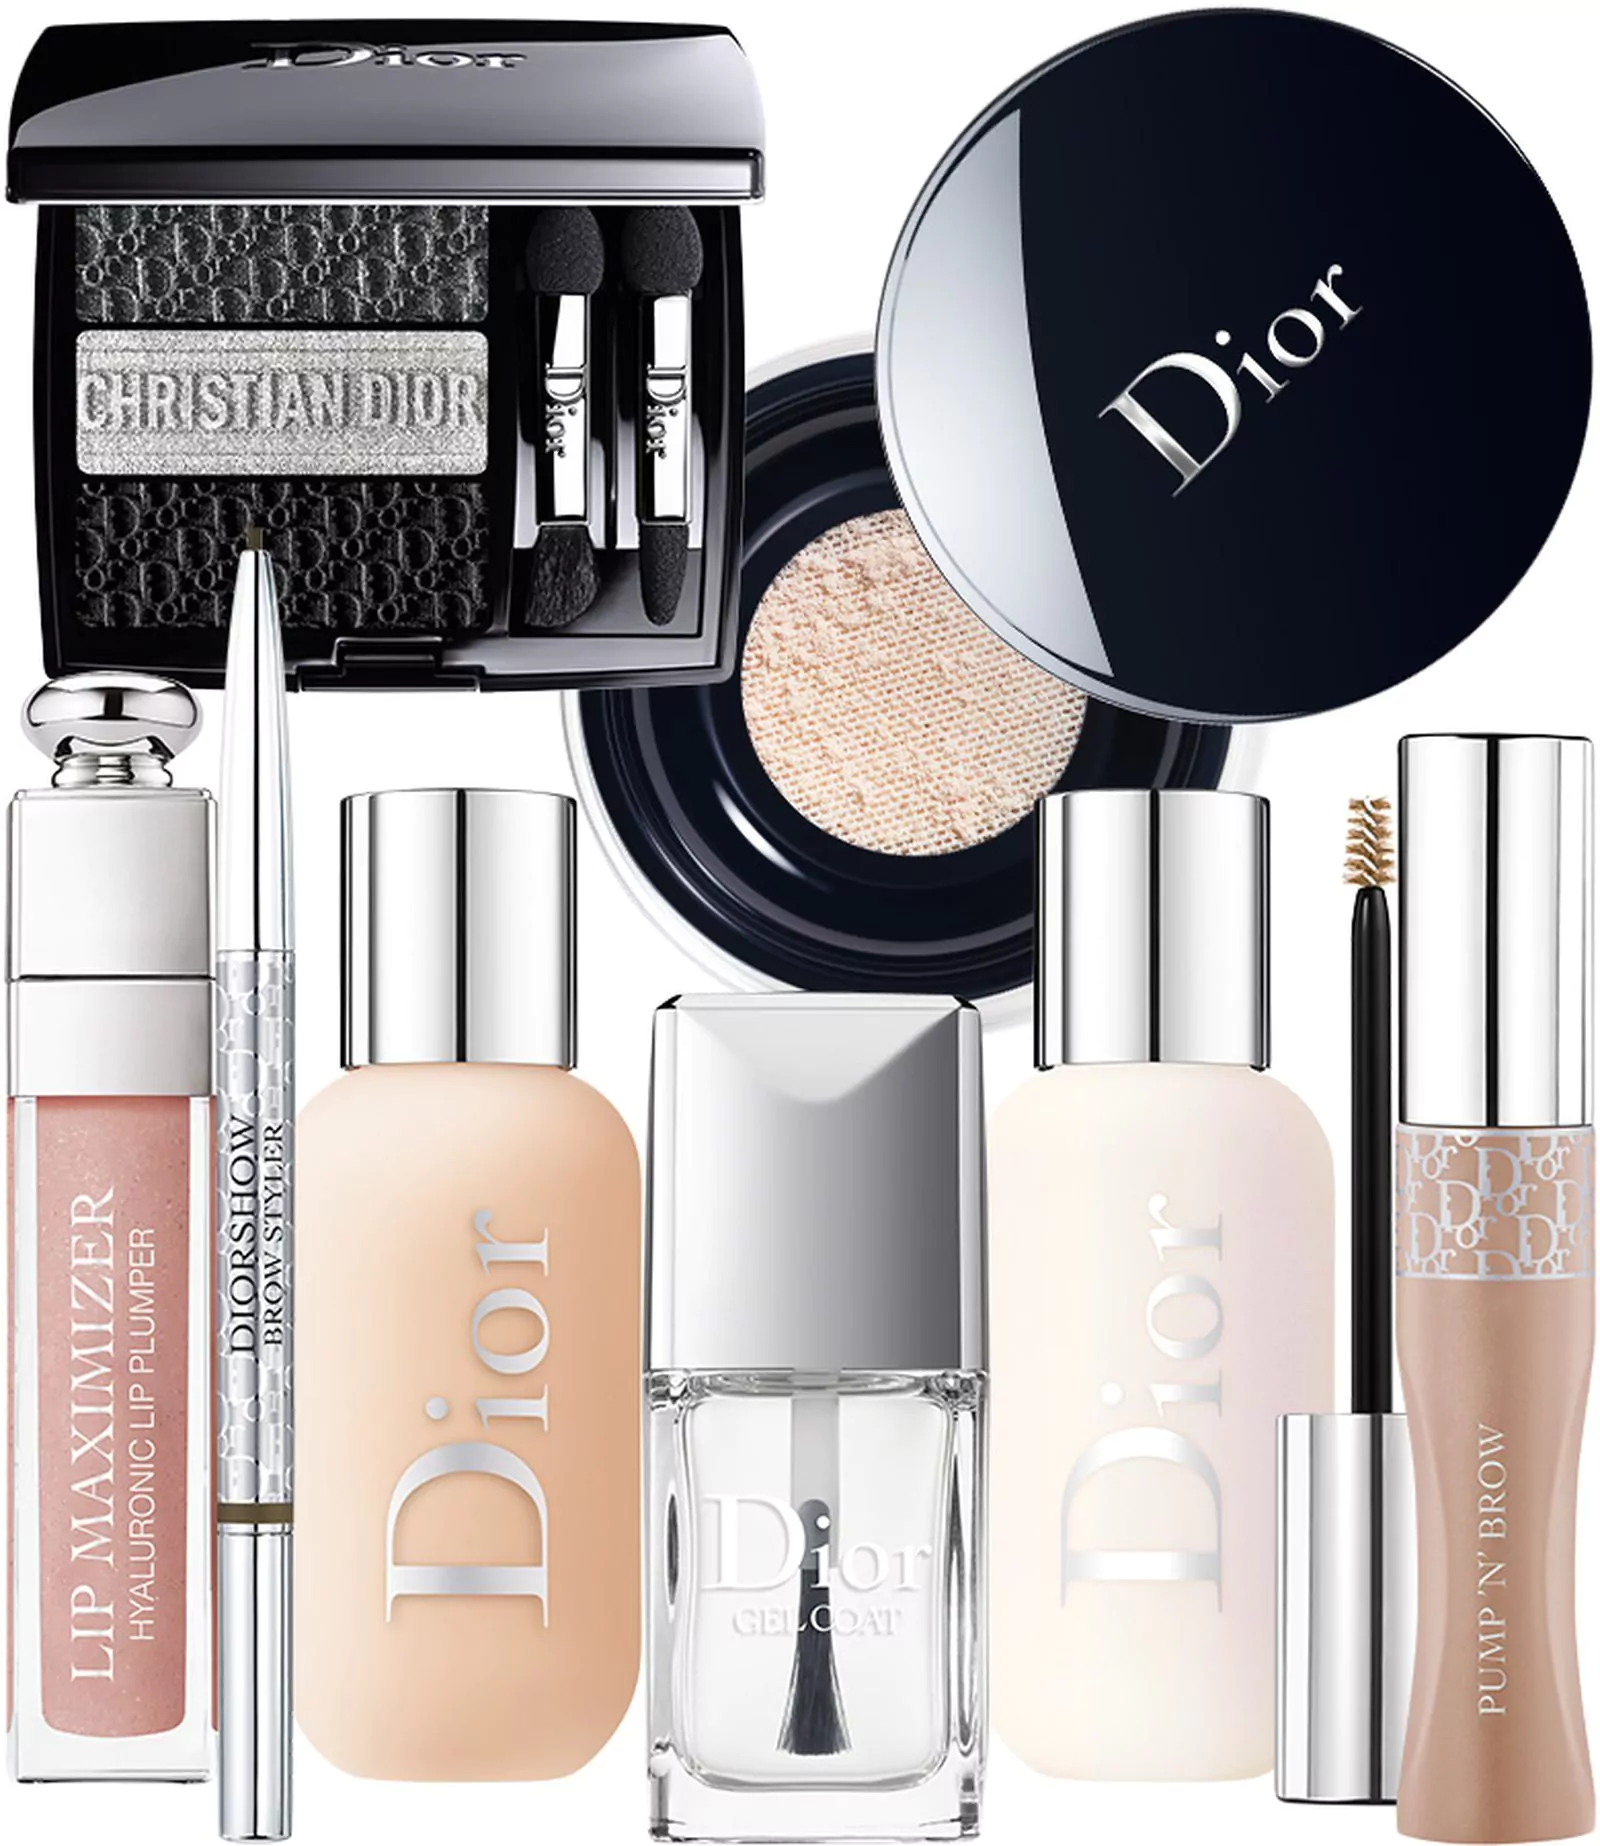 Dior Tri(O)blique, Forever and Ever Control Loose Powder, Lip Maximizer, Diorshow Brow Styler, Dior Backstage Face and Body Foundation, Top Coat Abricot, Dior Backstage Face and Body Primer, Diorshow Pump 'N' Brow